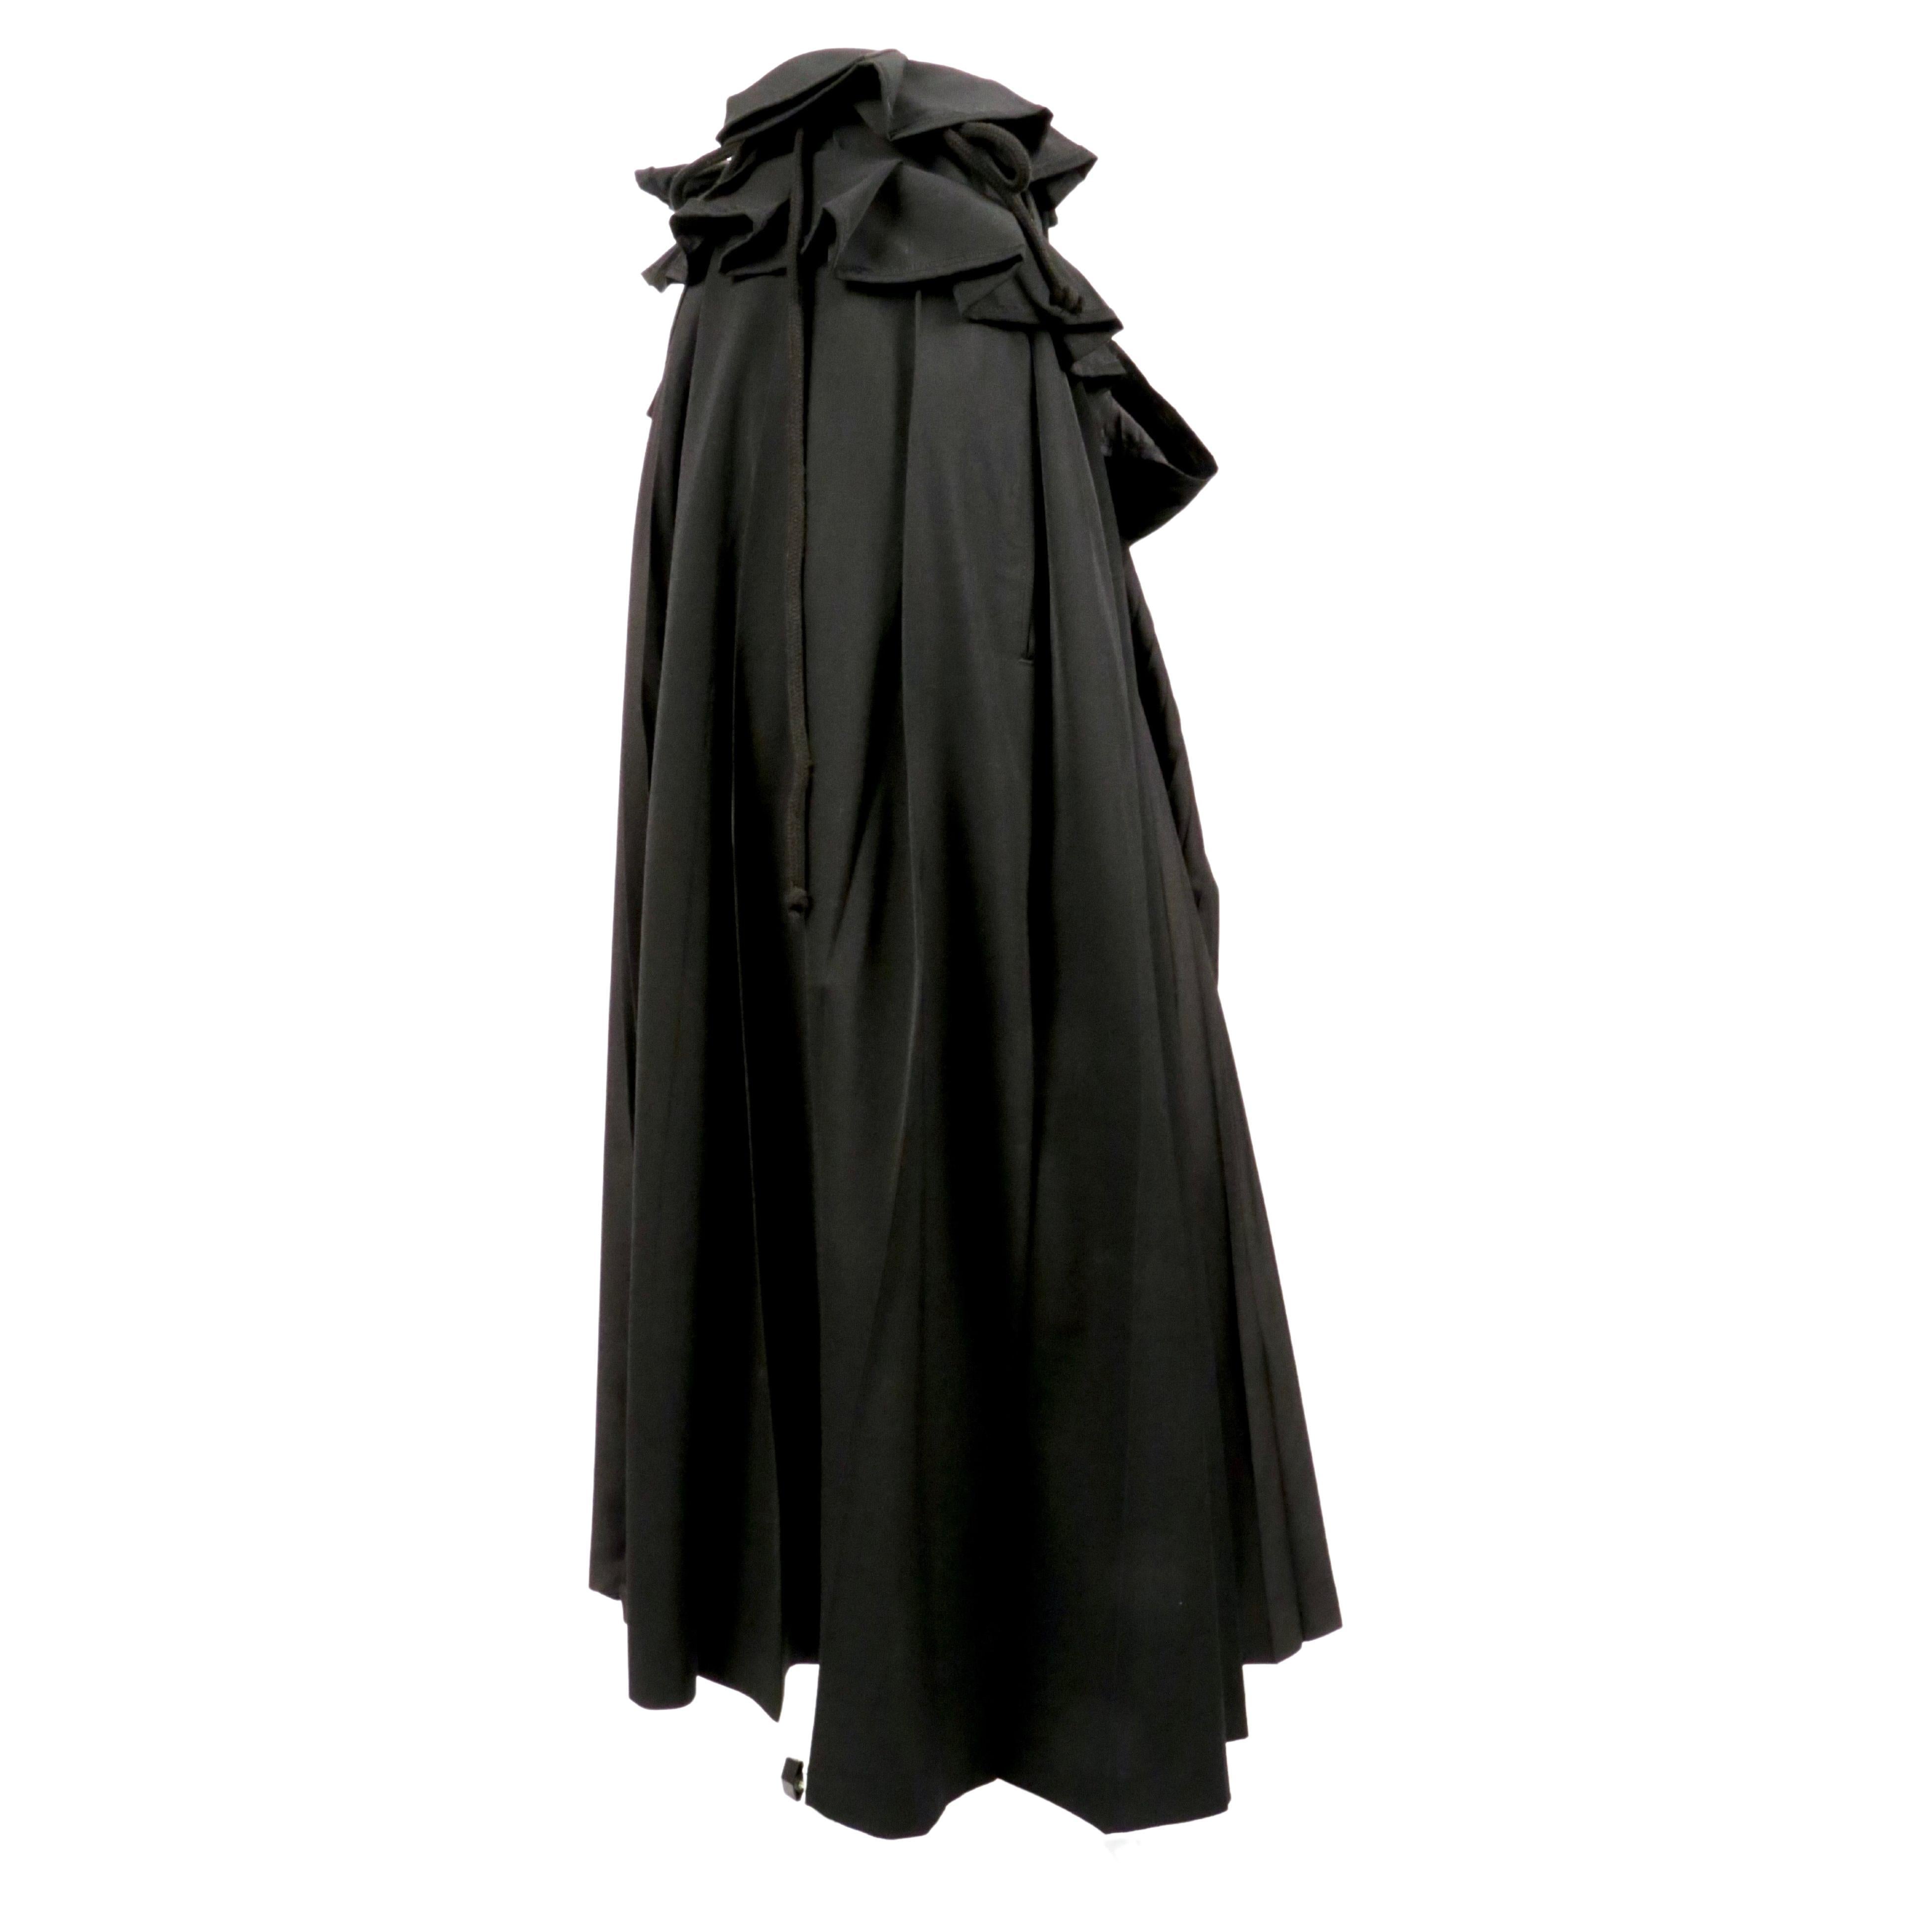 Jet-black wool and silk pleated wrap skirt with rope tie designed by Yohji Yamamoto dating to the early 2000's. Skirt can be worn a number of ways as the tie threads through several loops on the silk pleated portion. Japanese size 2 however this